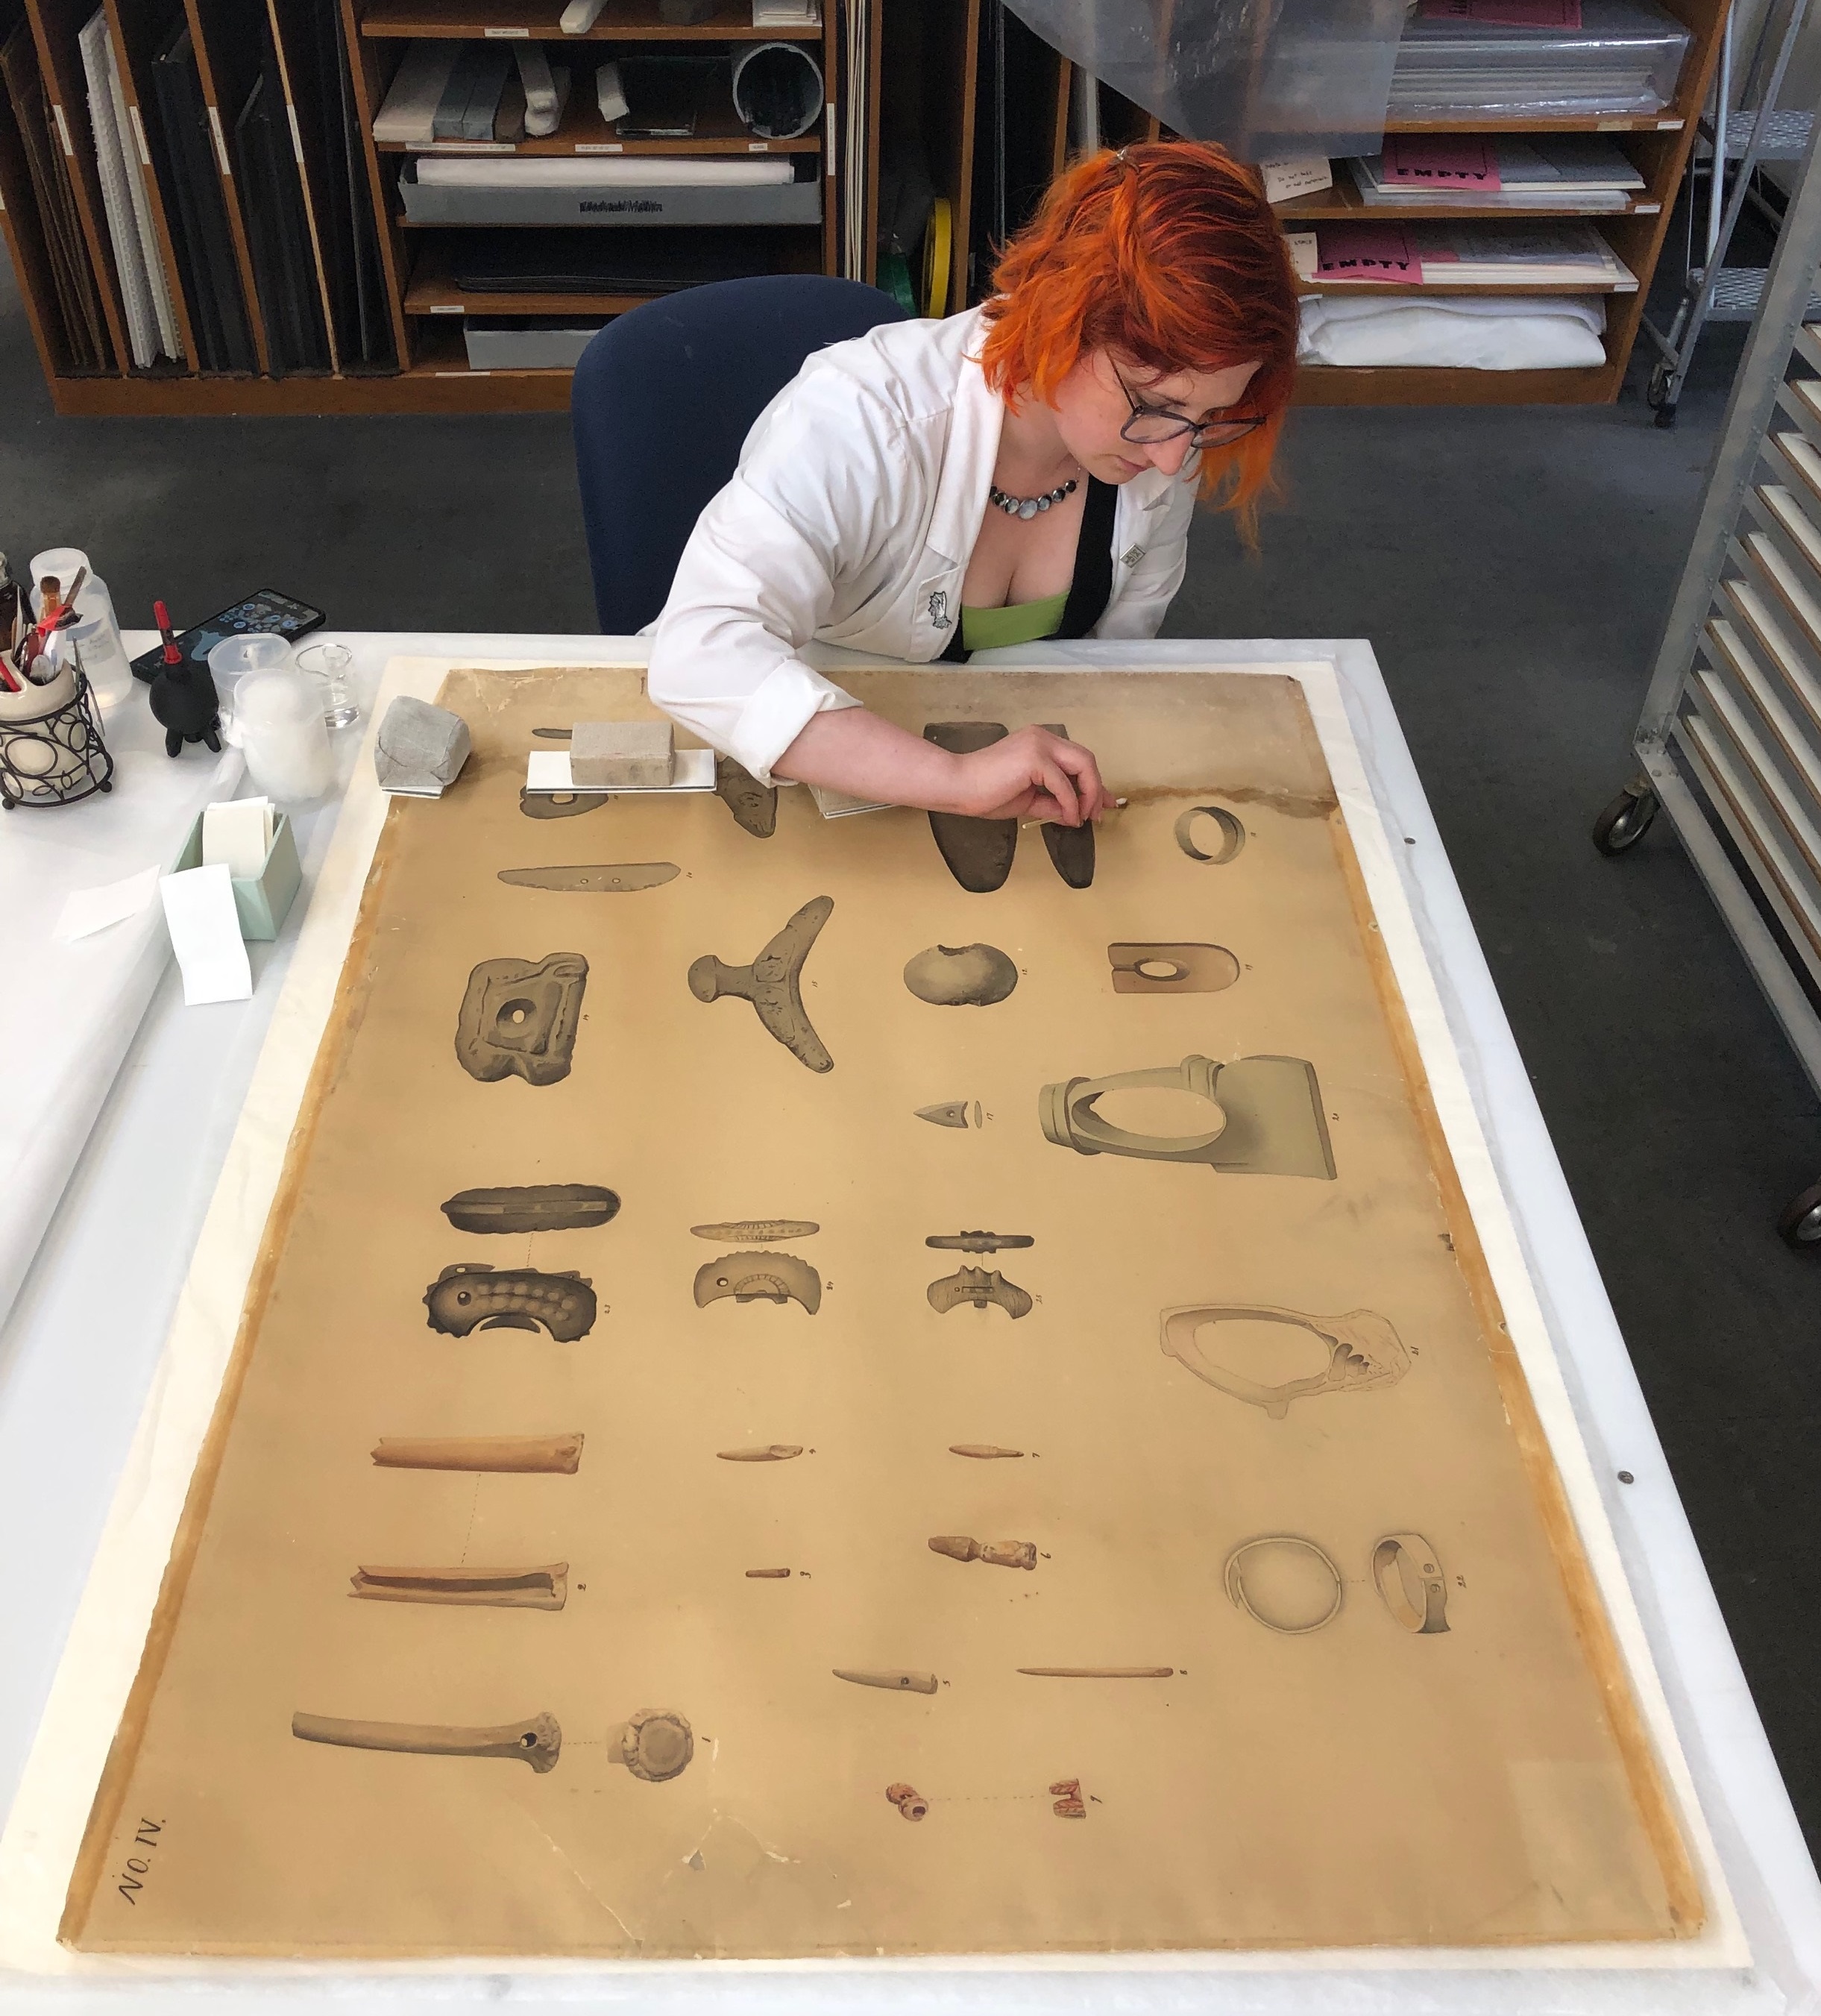 CCAHA Associate Conservator Joanna Hurd works on an 1893 Japanese watercolor from the Penn Museum's collections